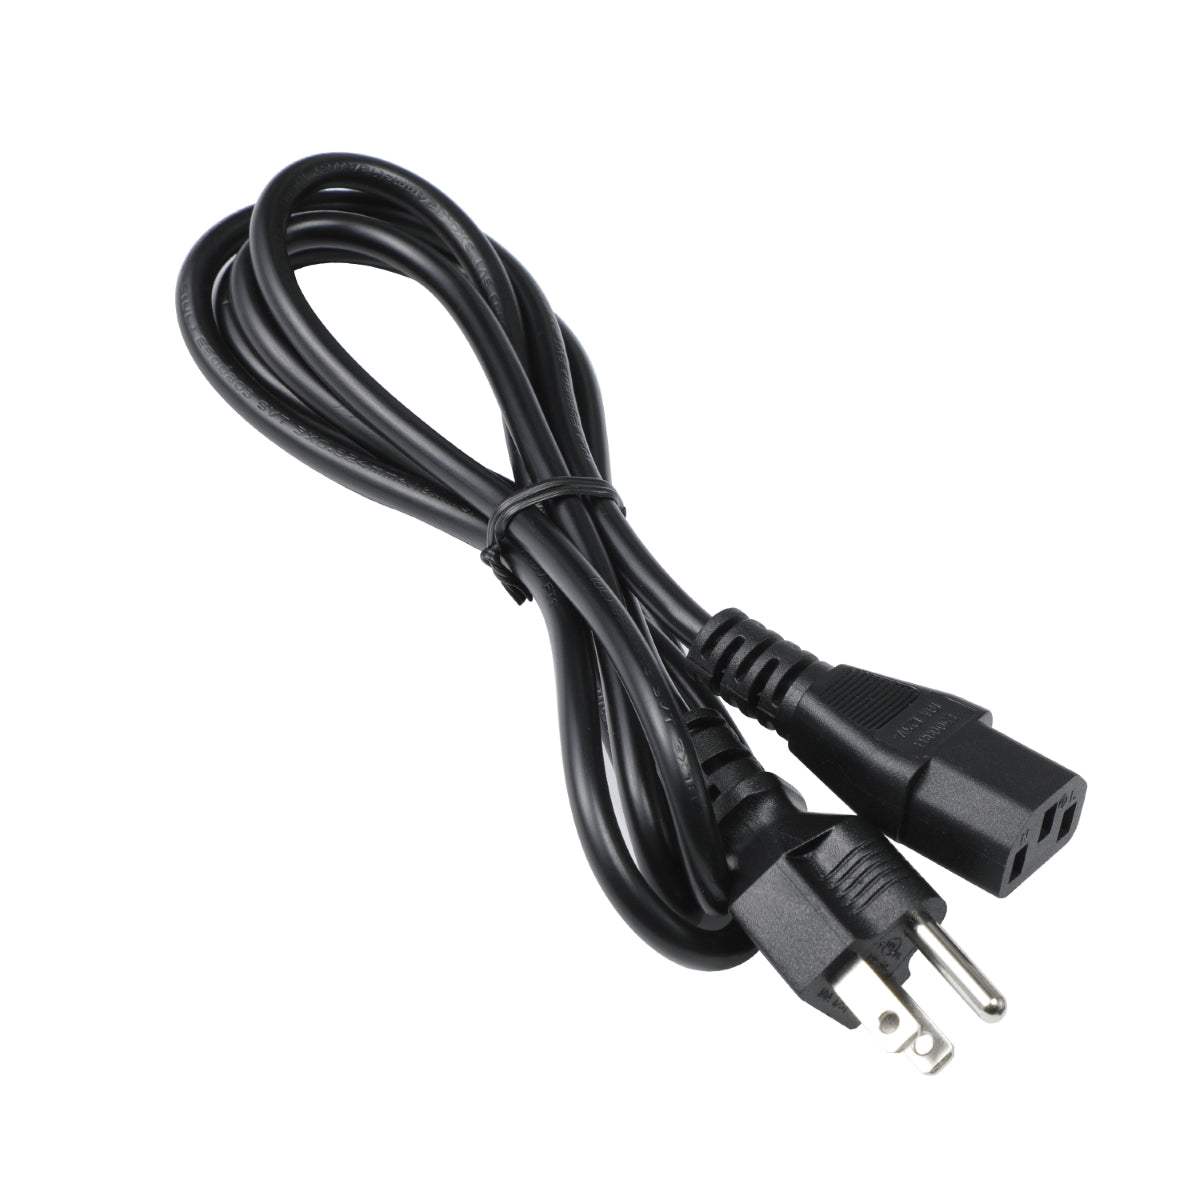 Power Cord for ViewSonic VG2455 Monitor